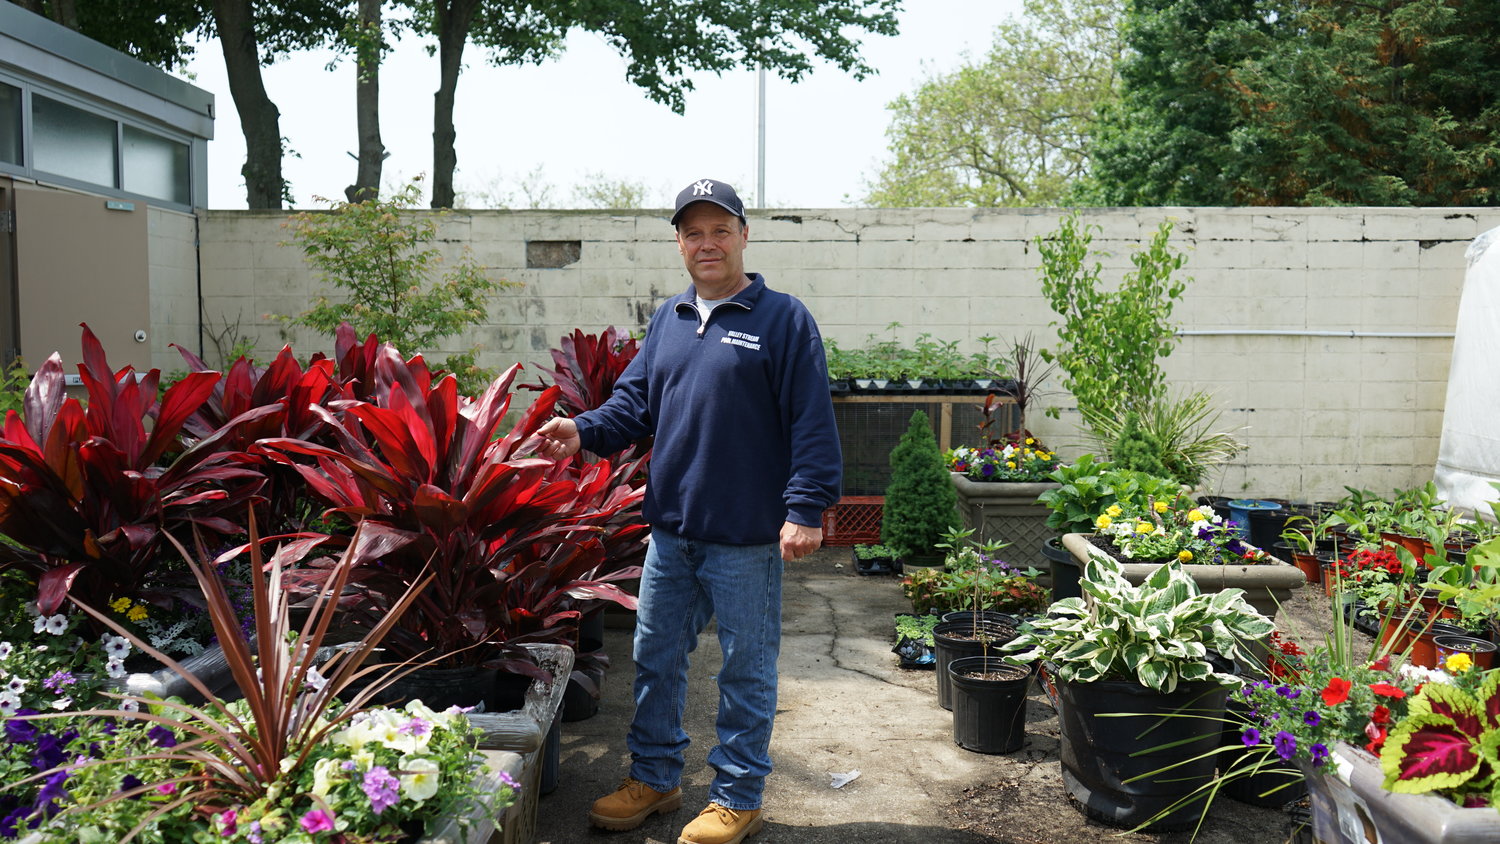 Village horticulturist Eugene Boening in his garden at the Hendrickson Park pool facility. His plant arrangements can be seen throughout Valley Stream.